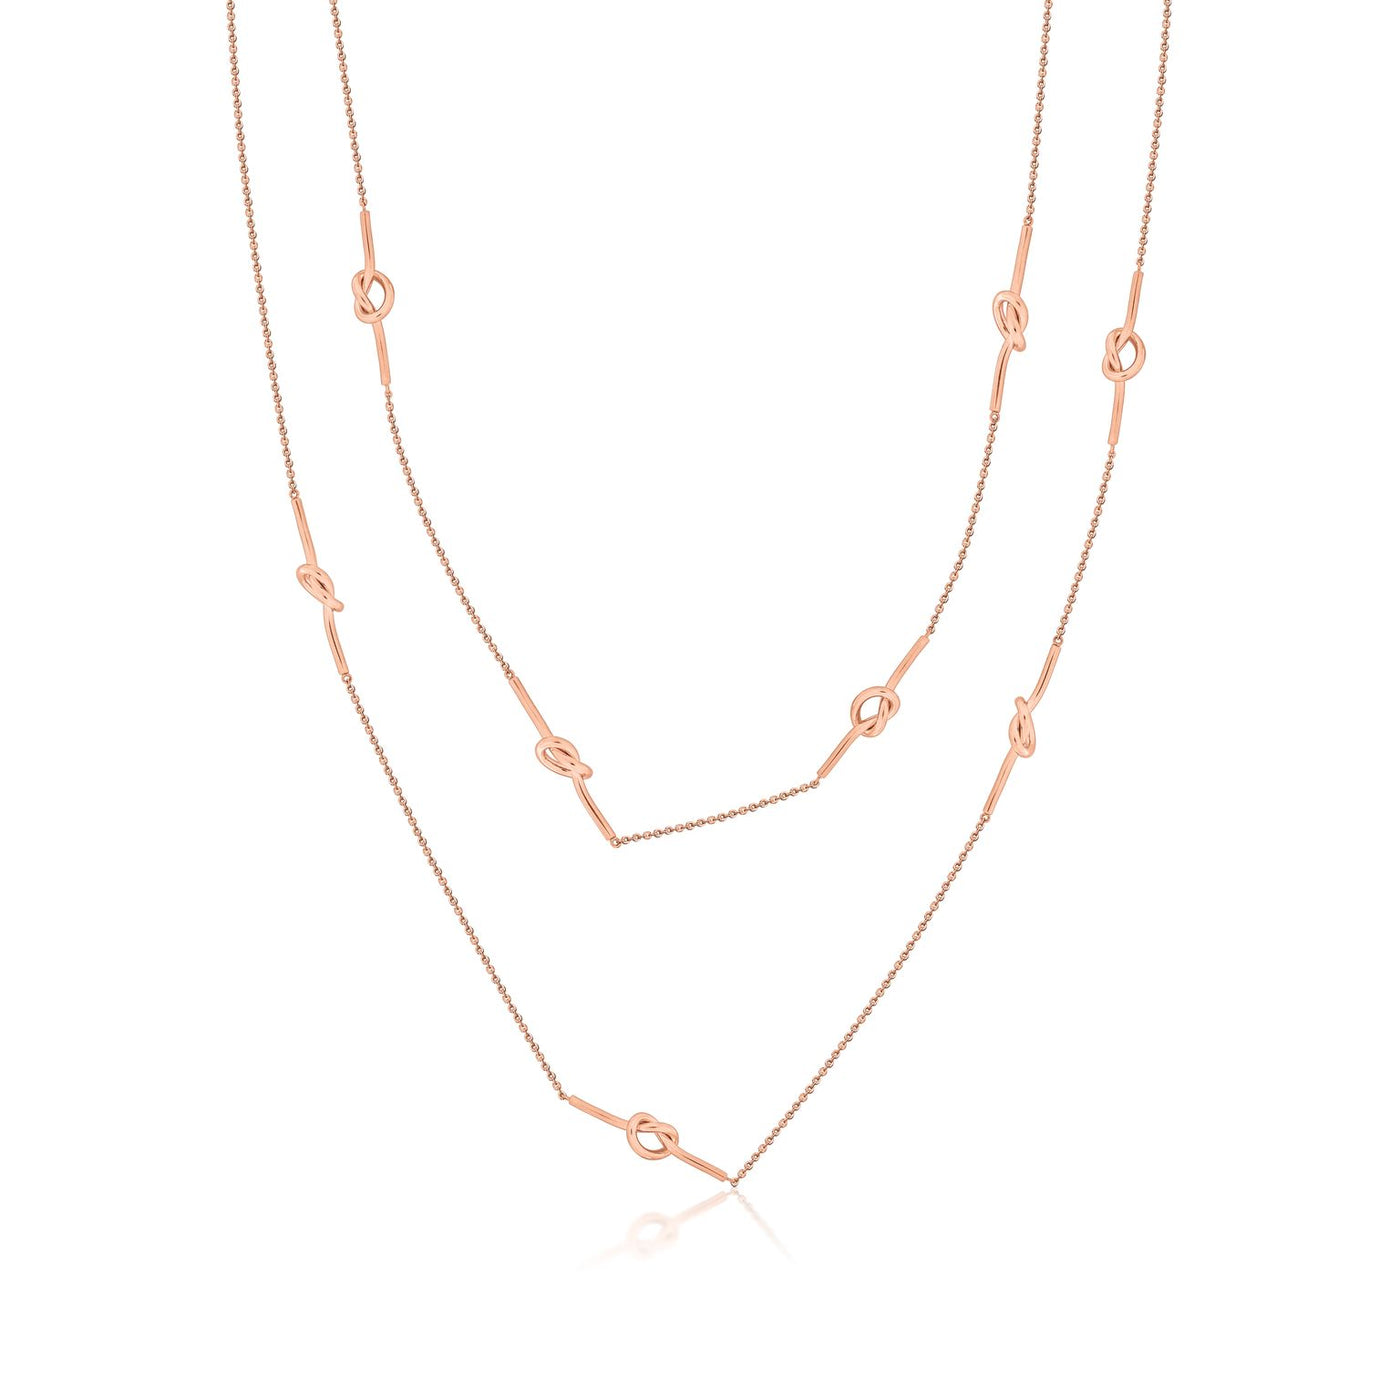 Romi Necklace - Love Knot Double Length - Rose Gold Plated/Silver